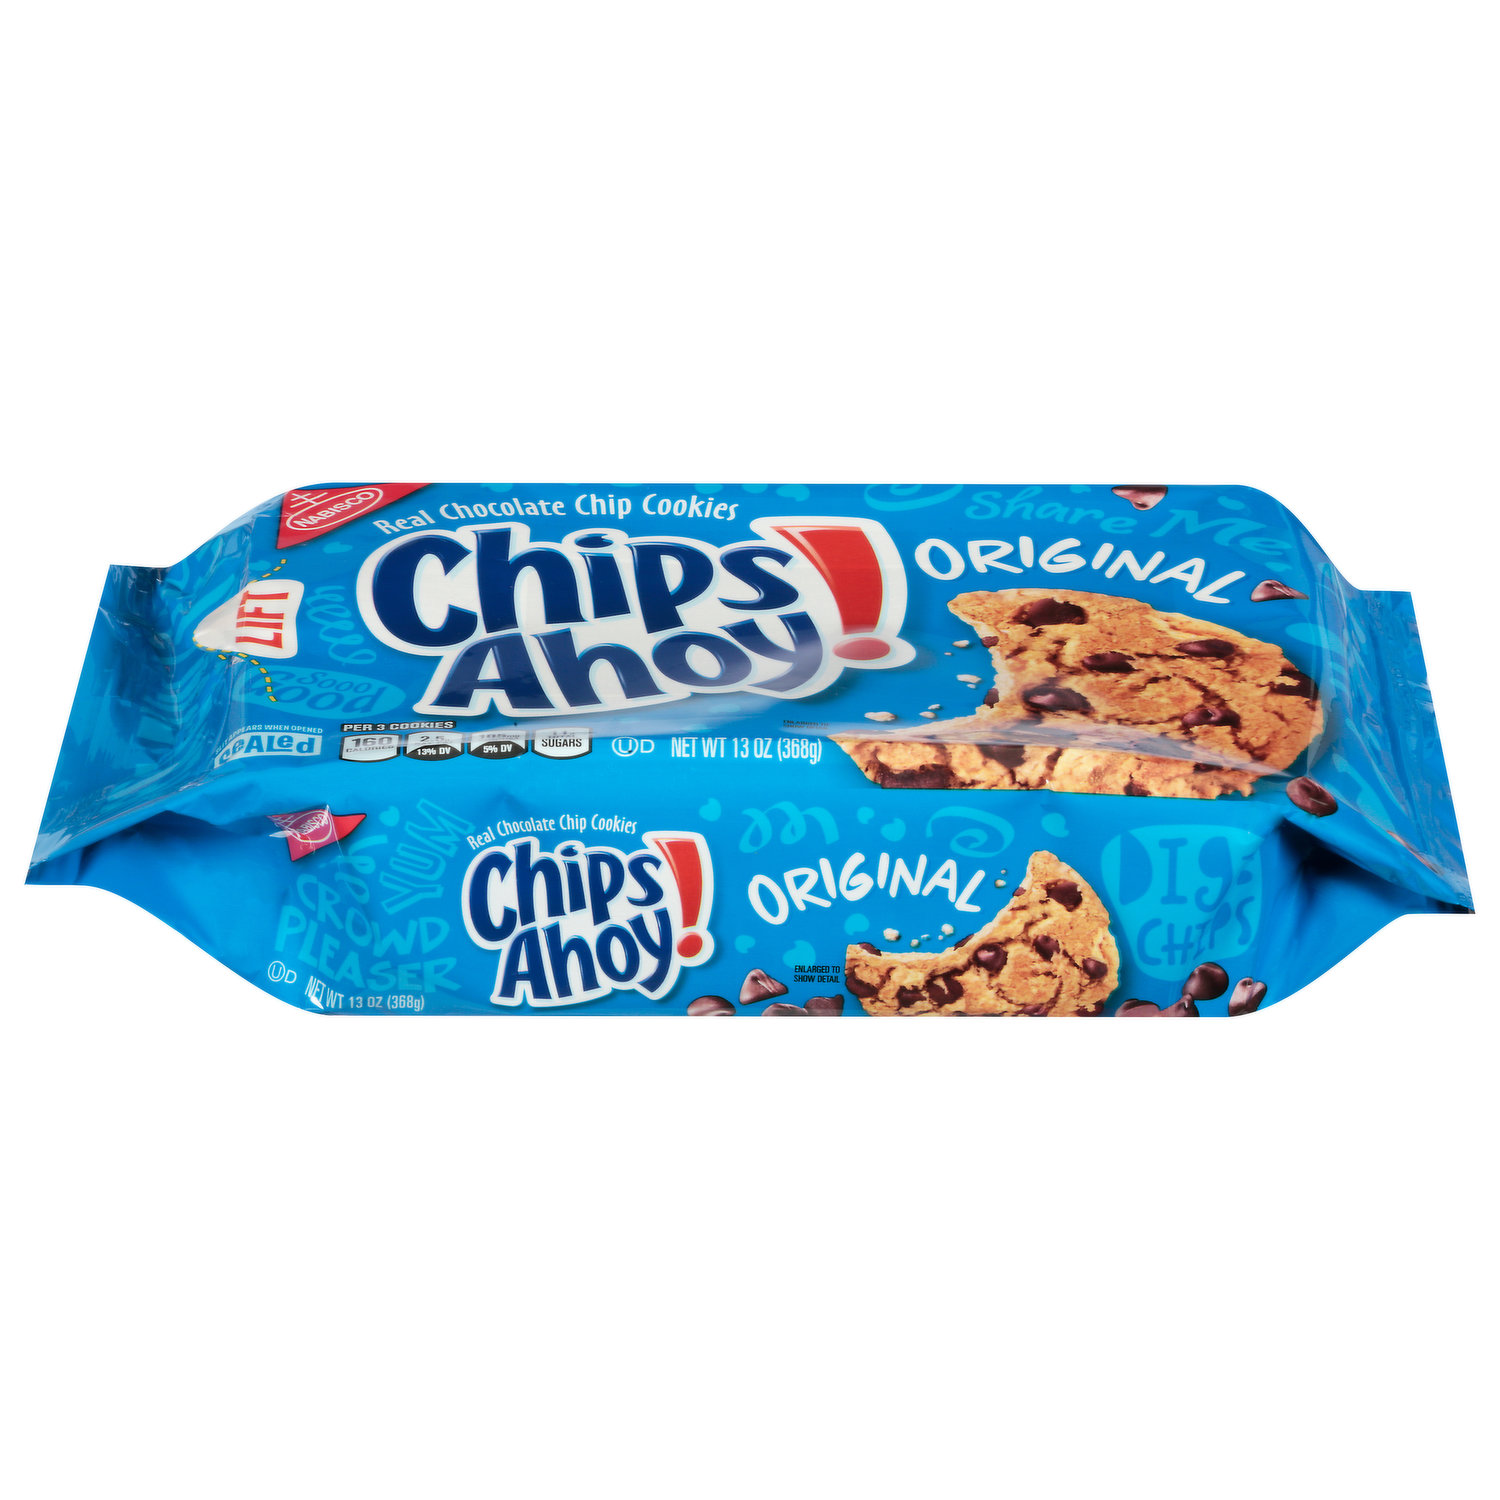  CHIPS AHOY! Original Chocolate Chip Cookies, 16 King Size Snack  Packs (10 Cookies Per Pack, 2 Boxes) : Books